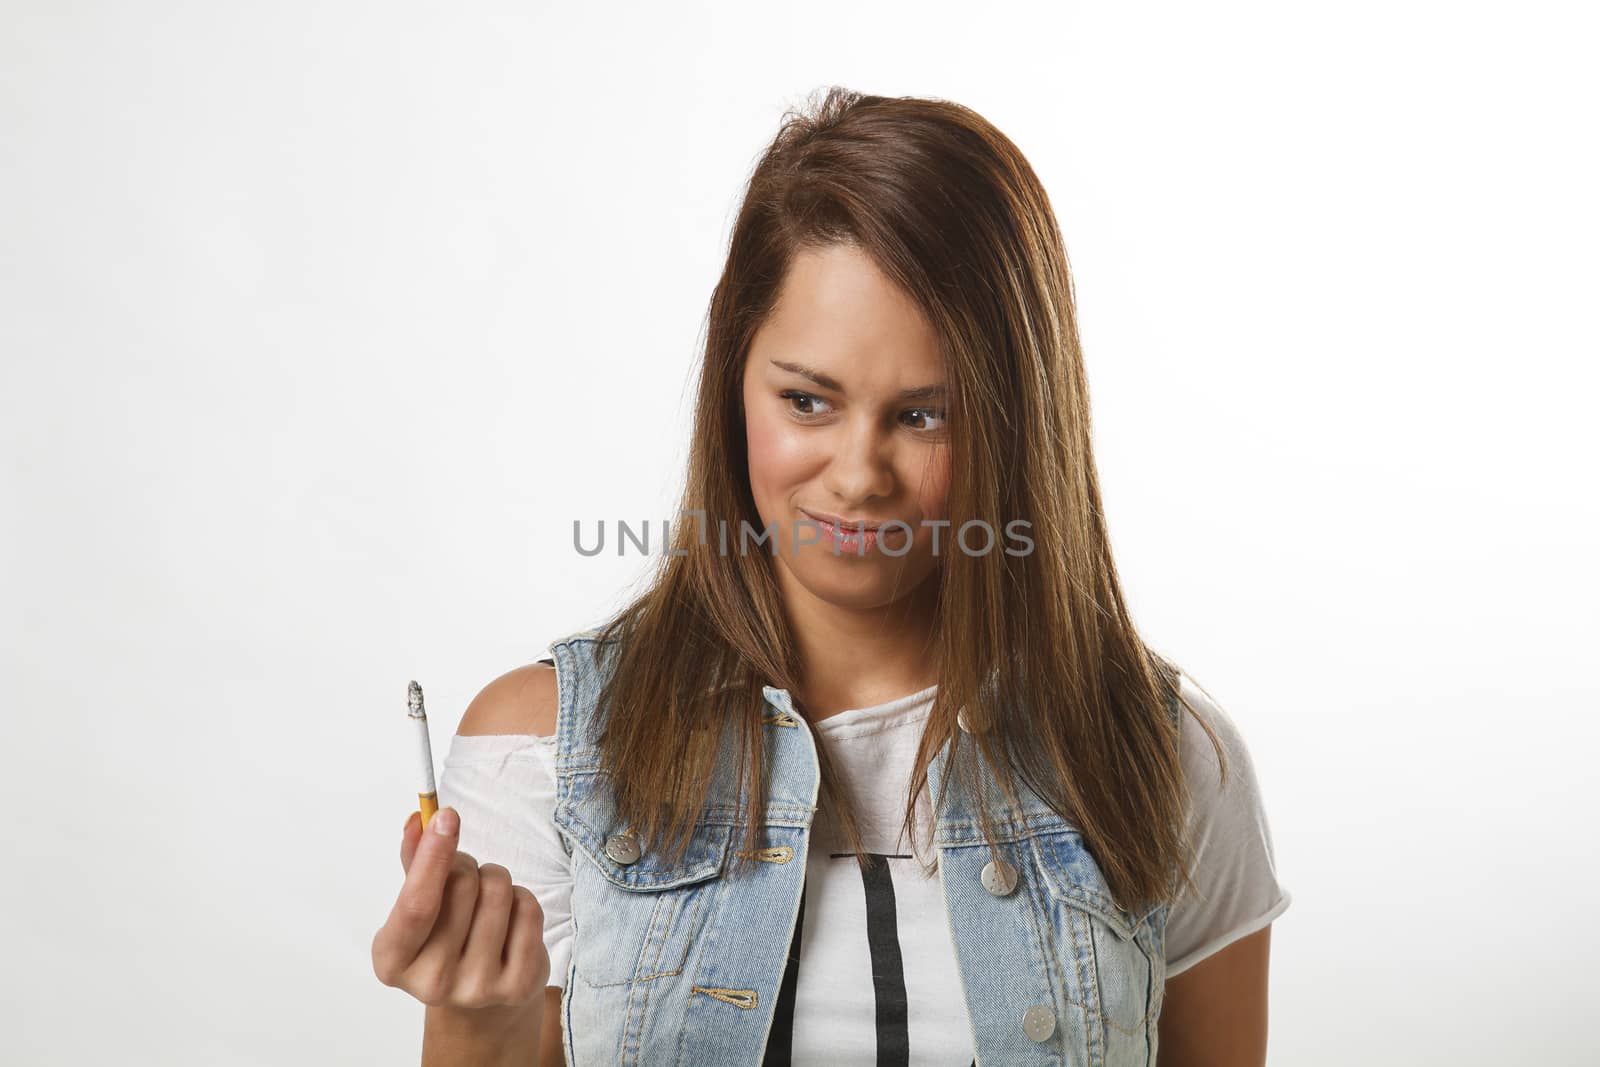 twenty something girl holding a cigarette with digusted look